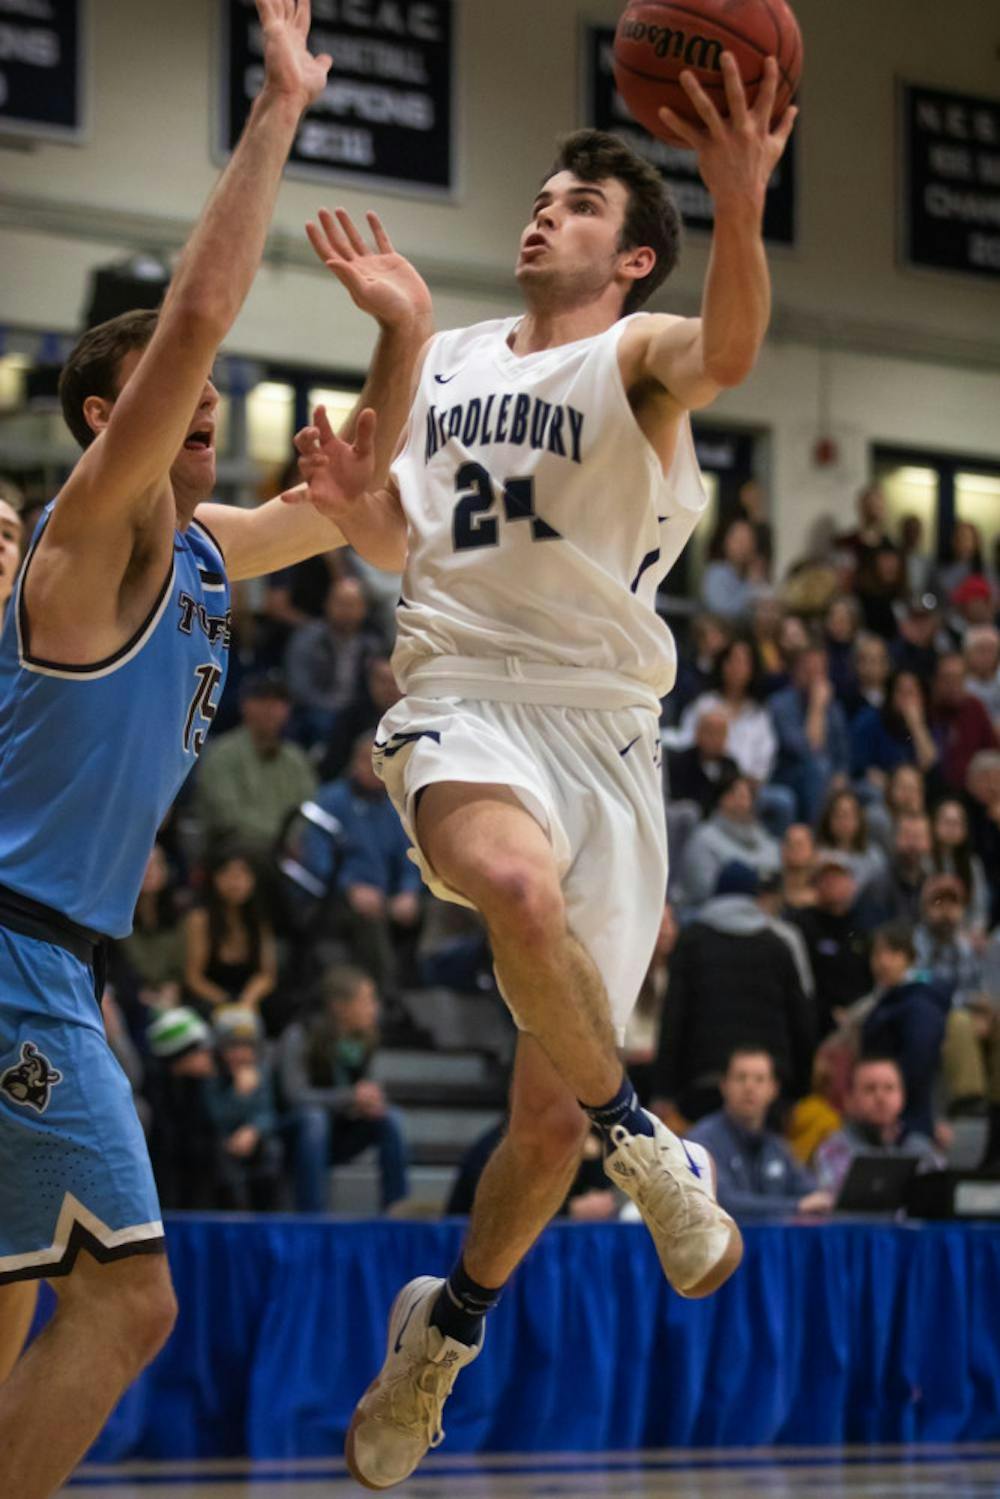 <span class="photocreditinline"><a href="https://middleburycampus.com/39670/uncategorized/michael-borenstein/">MICHAEL BORENSTEIN</a></span><br />The Middlebury men’s basketball team received its 10th overall bid to the NCAA Tournament this past weekend. The Panthers (18-7) are scheduled for a first-round matchup against Nichols College (25-2) at 5:30 p.m on March 1. The tournament will be hosted by Rowan University in Glassboro, New Jersey.